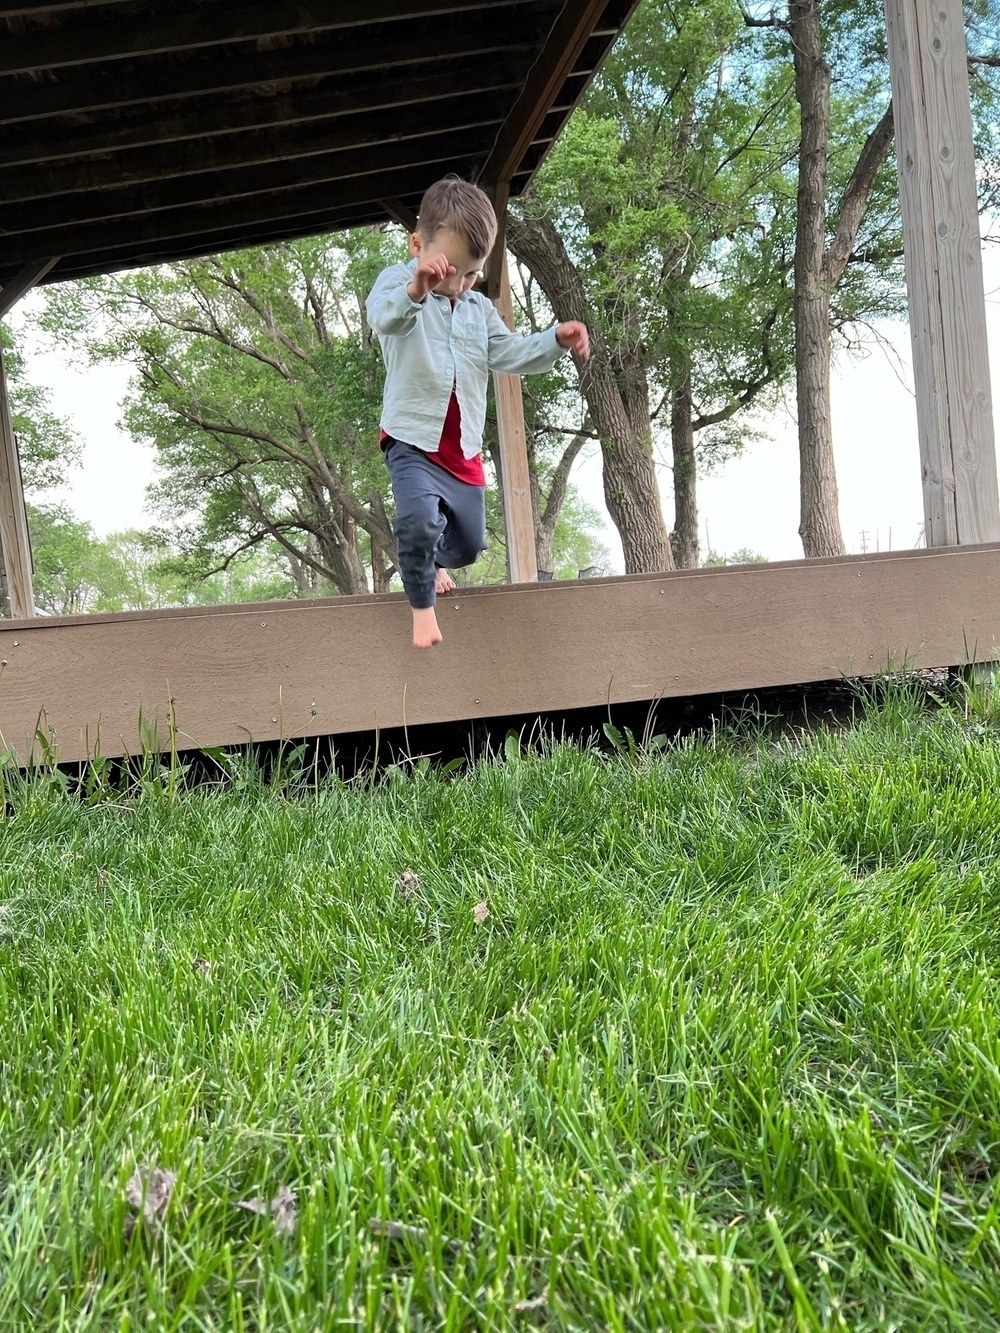 My boy, jumping from a backyard platform/stage and rolling onto the grass. 